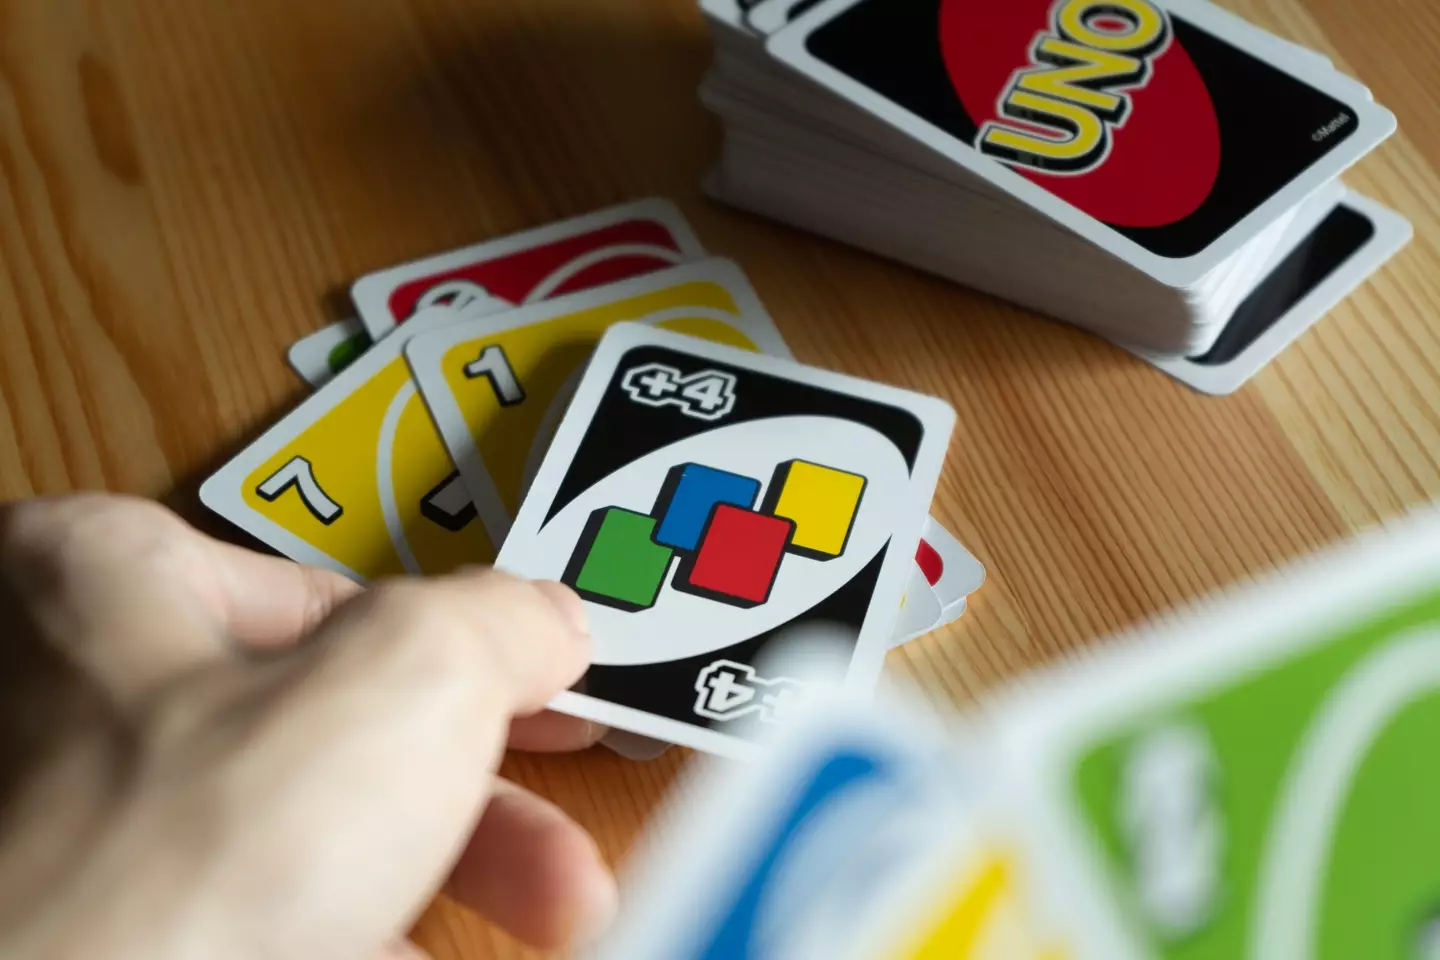 "Let's play UNO!" are the immortal words spoken 10 minutes before the Christmas family argument.